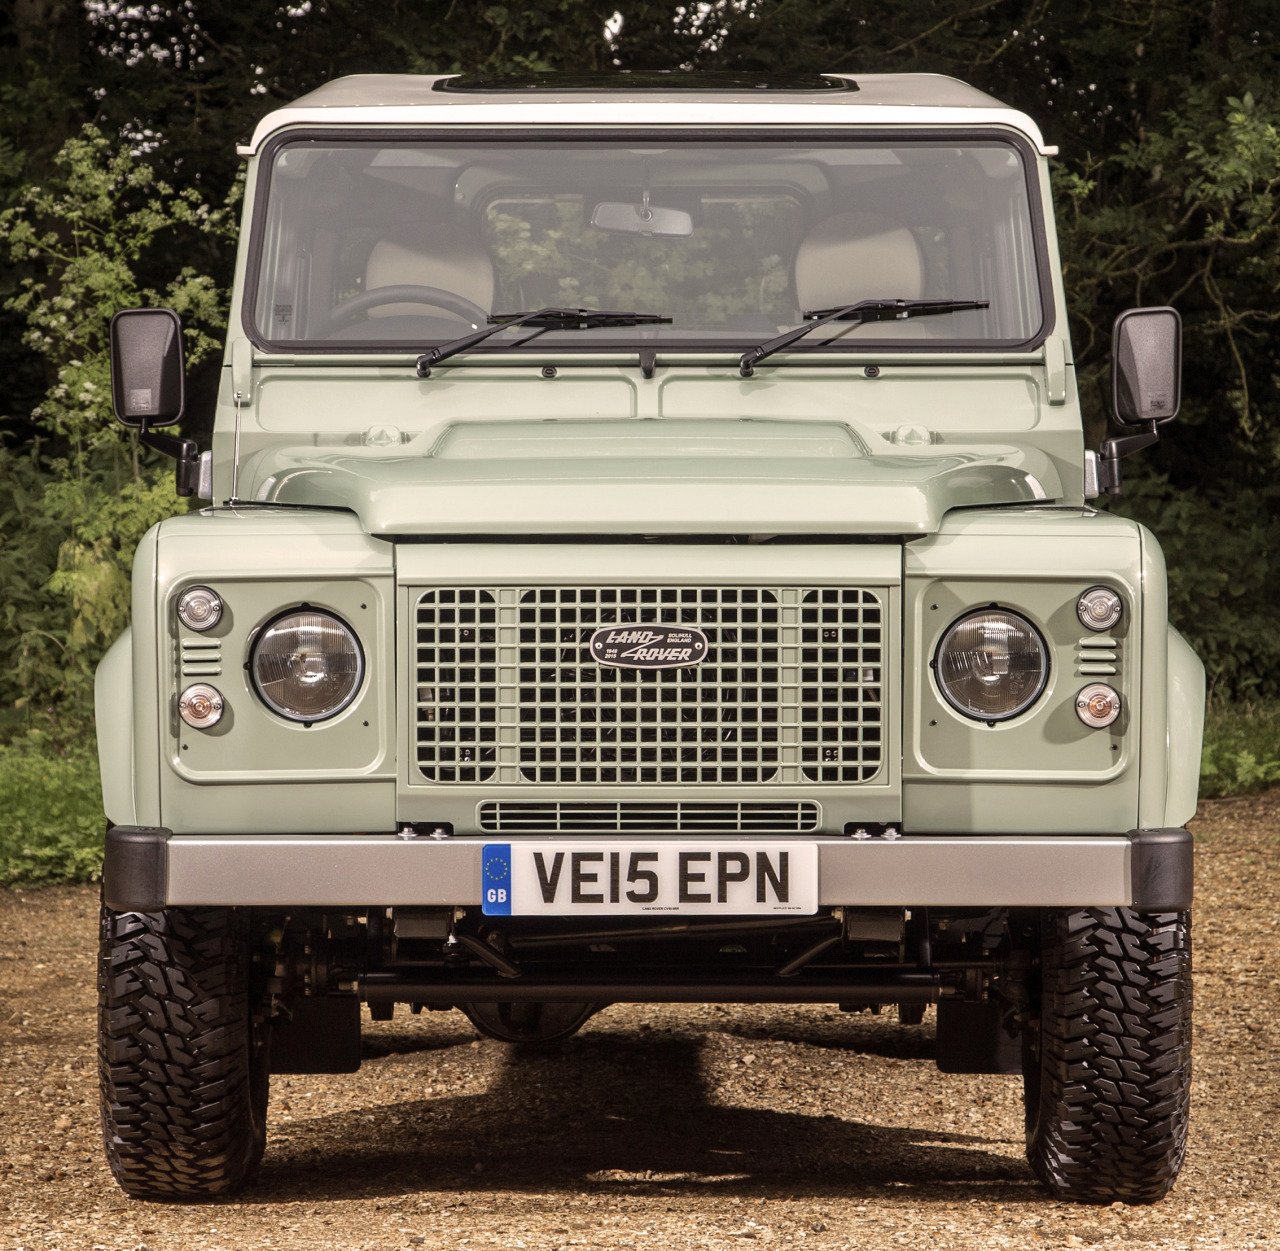 carsthatnevermadeit:  Land Rover Heritage Defender, 2015. A production model with